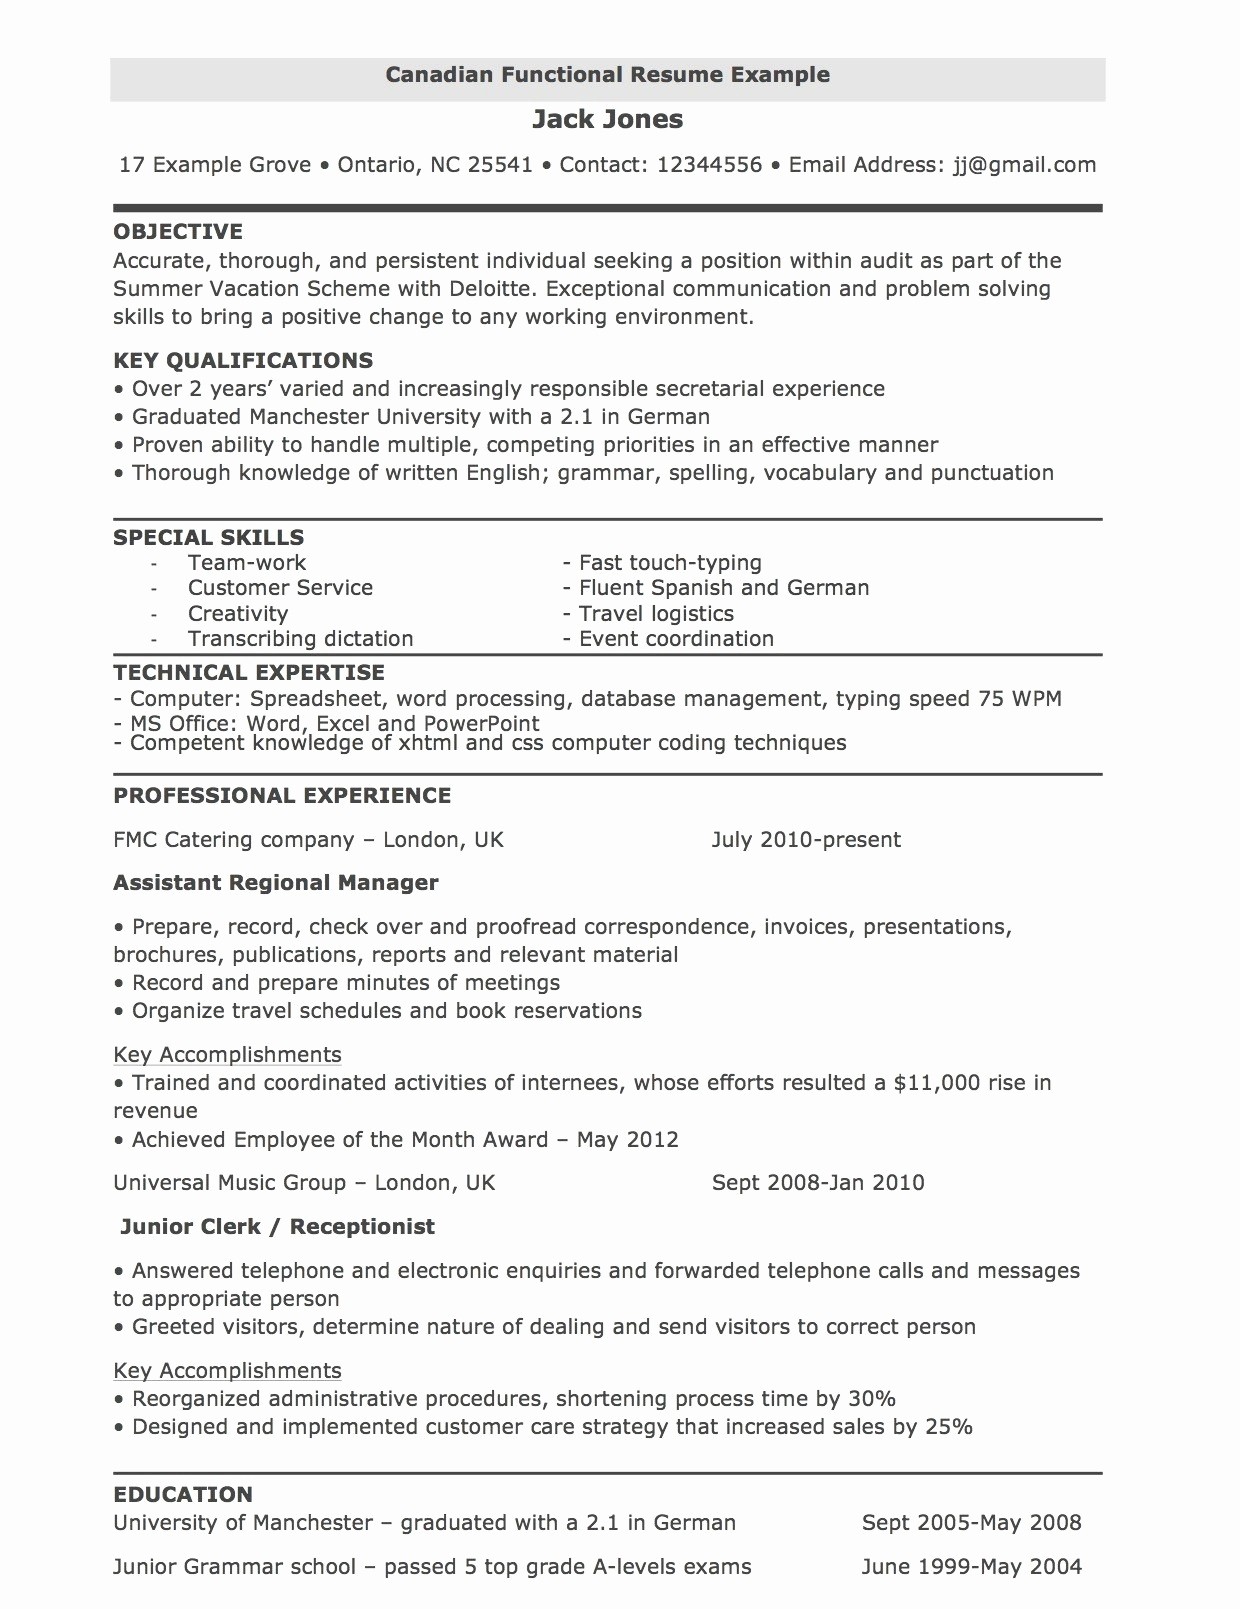 Combined Resume and Cover Letter Fresh Template for Canadian Resume